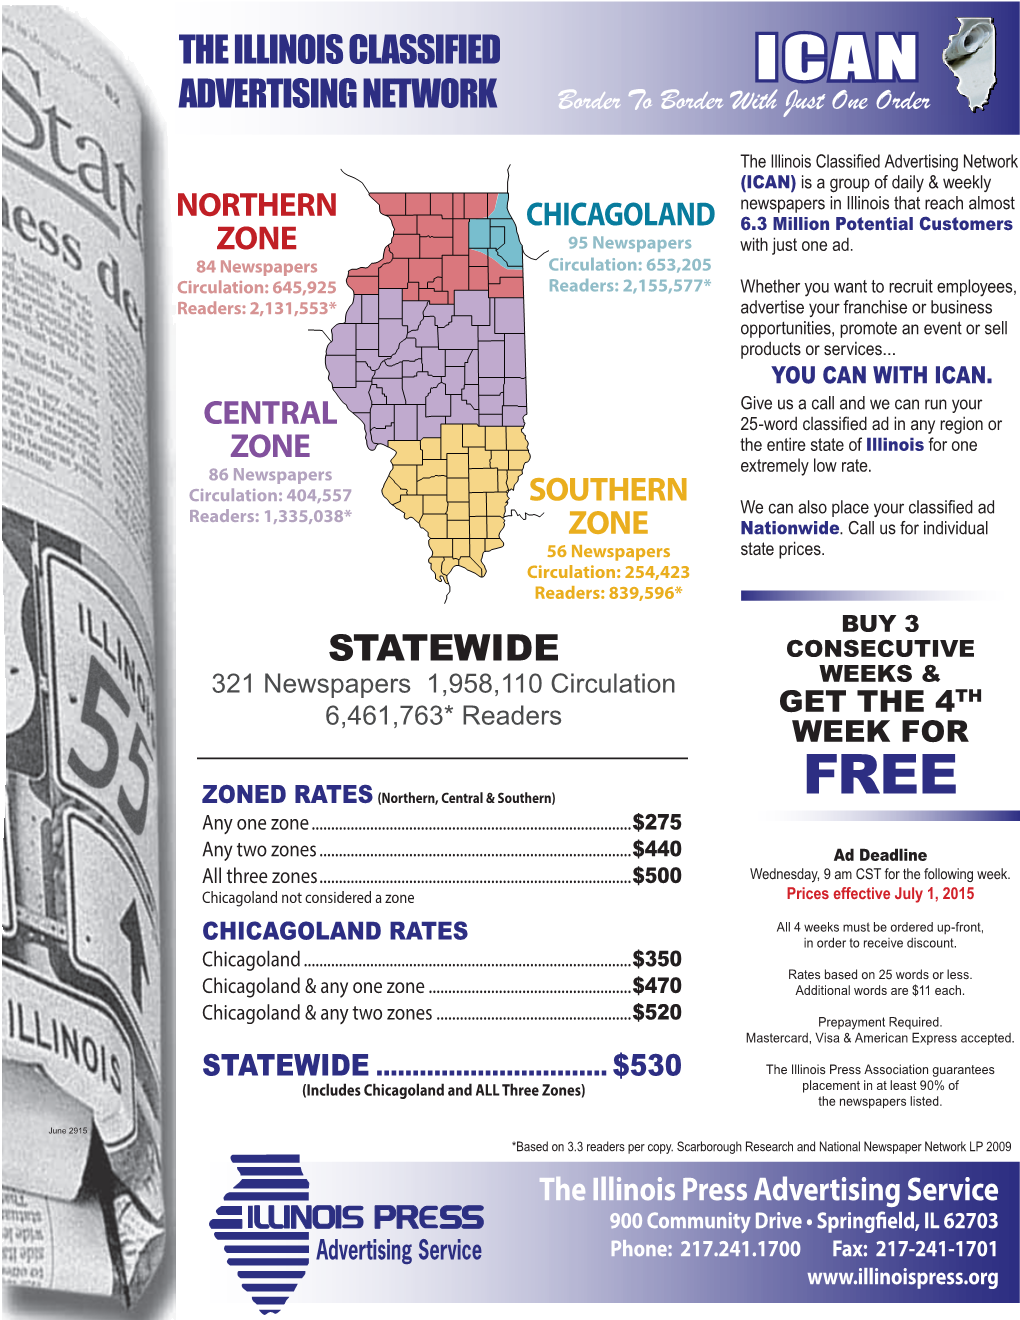 The Illinois Classified Advertising Network Statewide